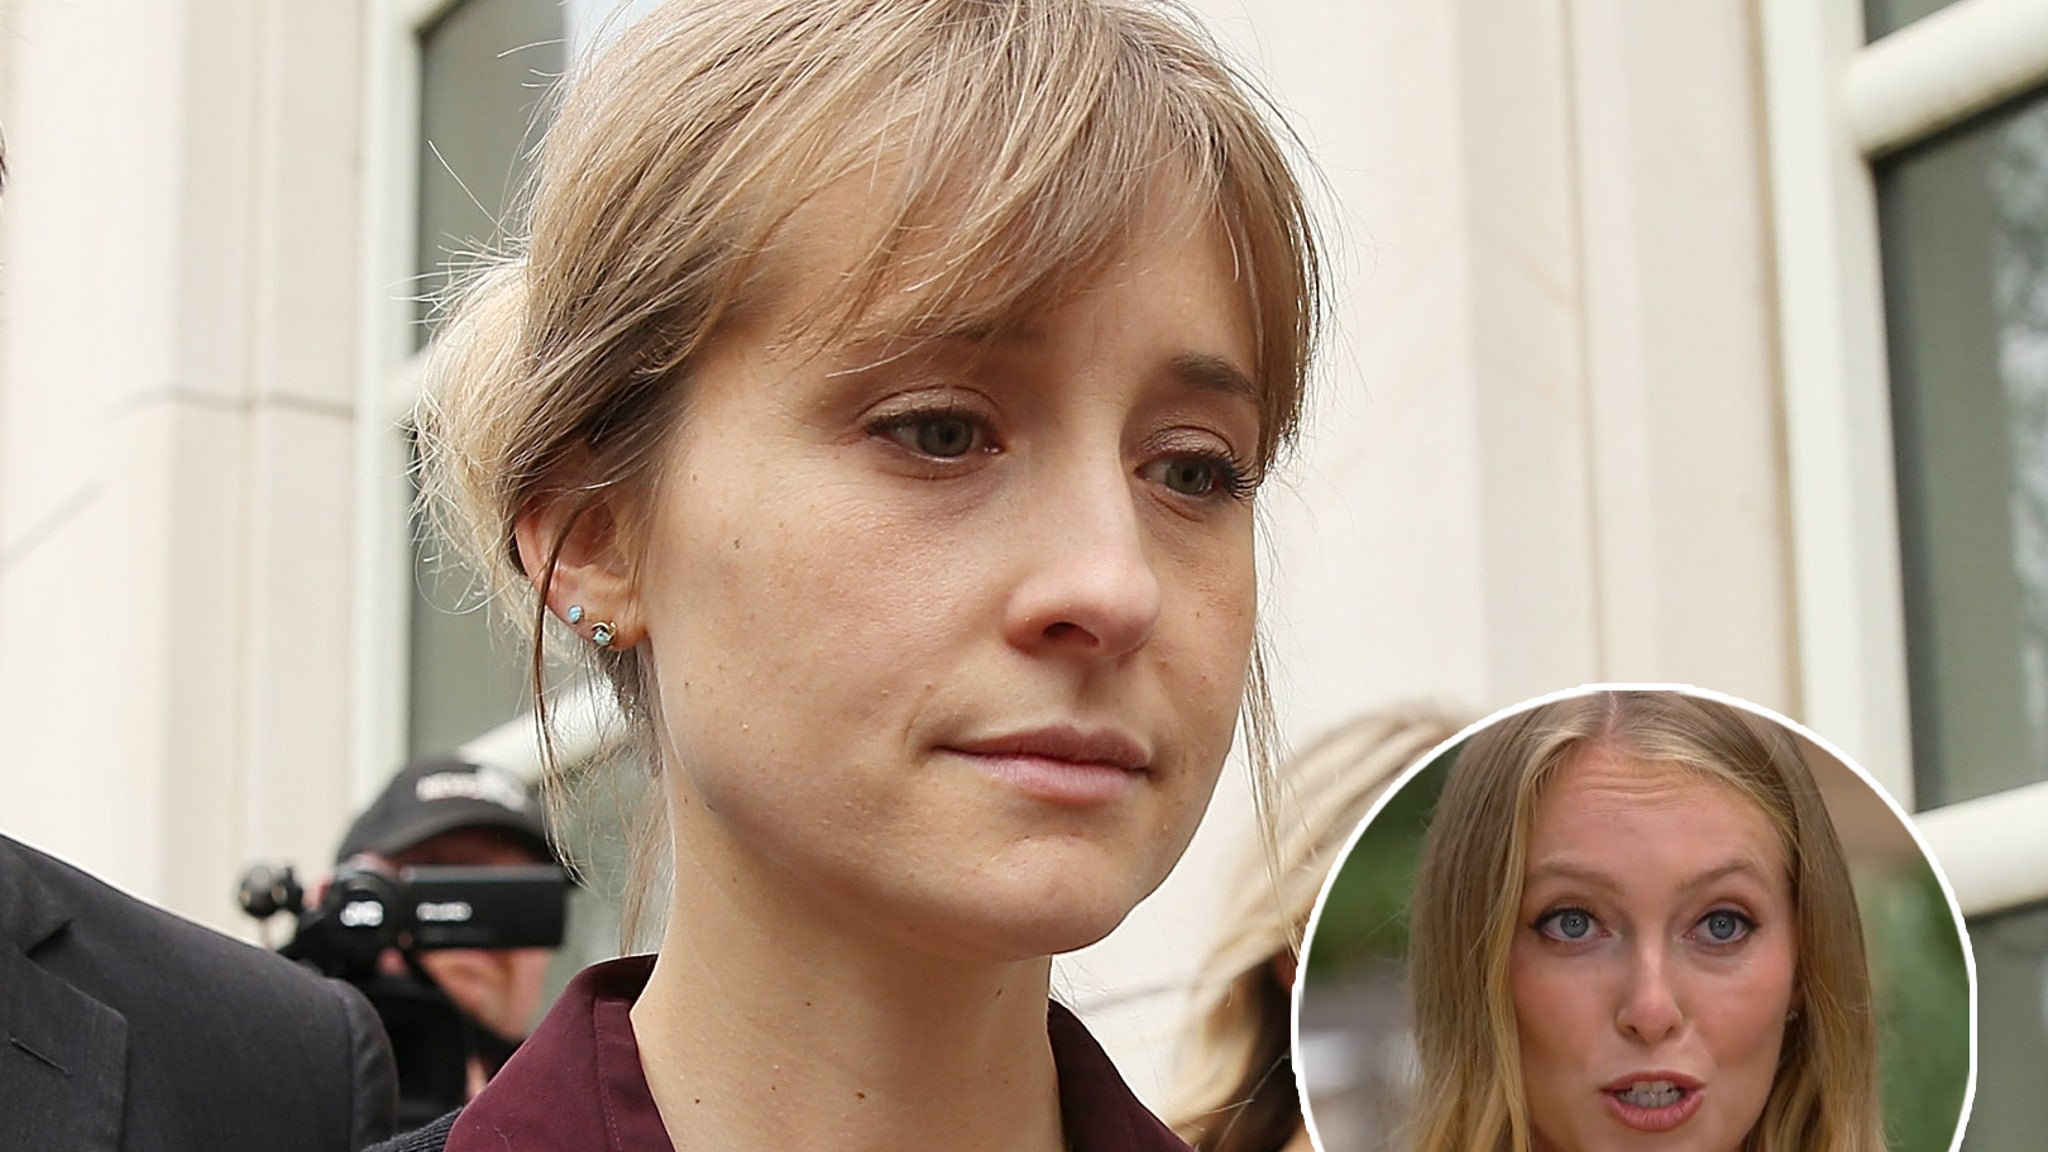 Nxivm Survivor India Oxenberg Alleges Master Allison Mack Blackmailed Her With Nude Photos